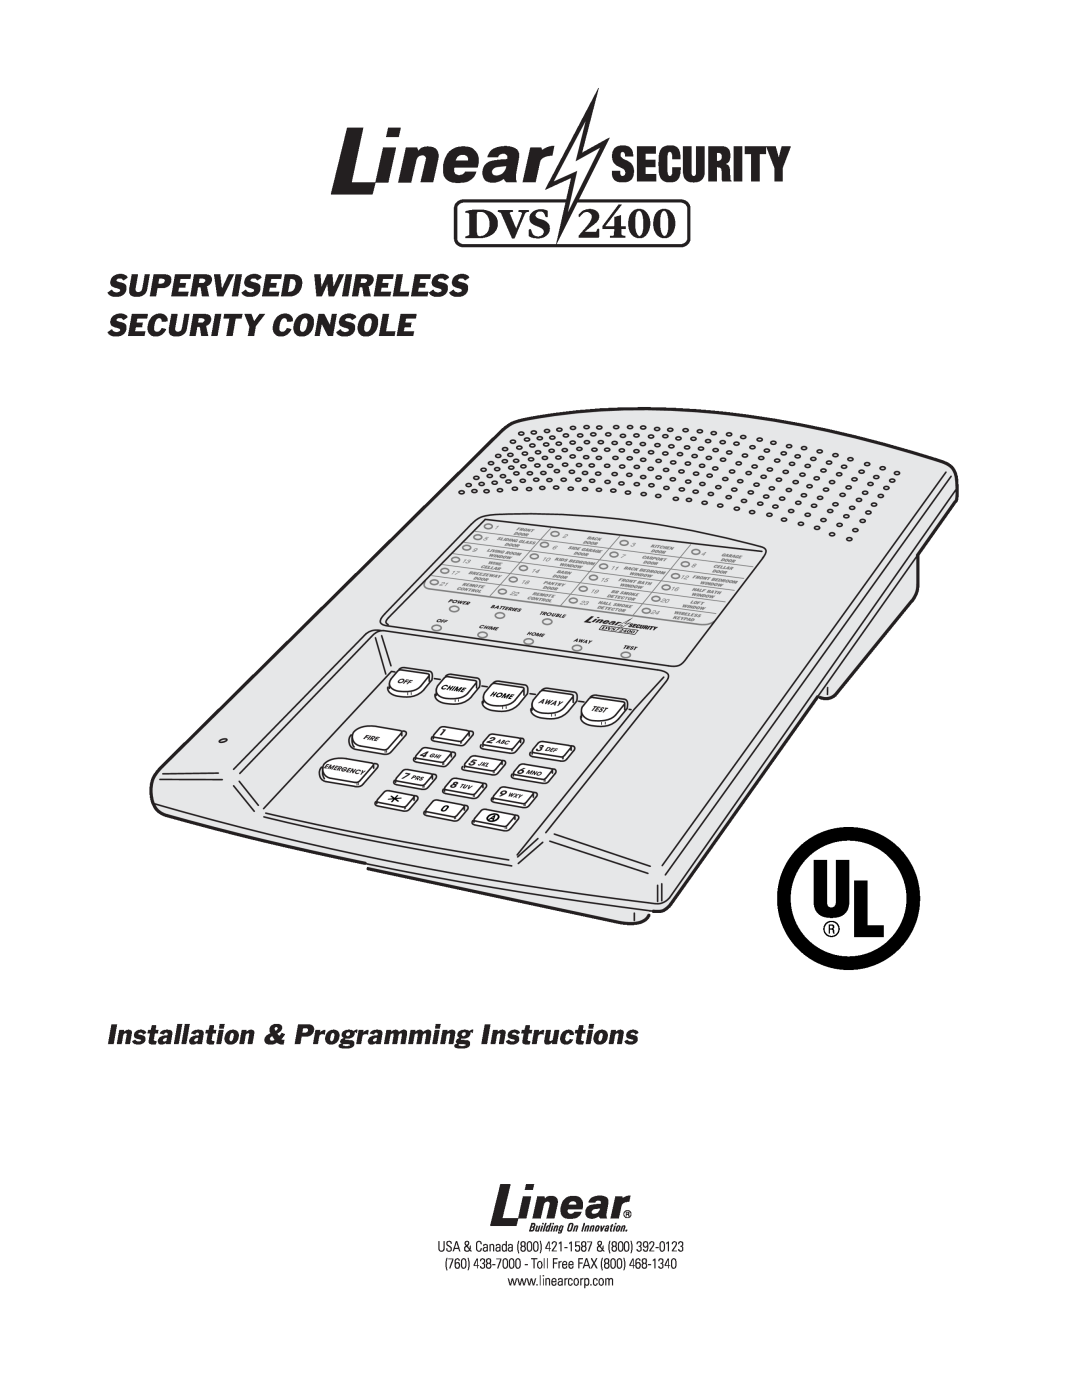 Linear DVS-1200, DVS-2400 manual RA-2400, Remote Access Software, For Technical Assistance Call, Linear Technical Services 